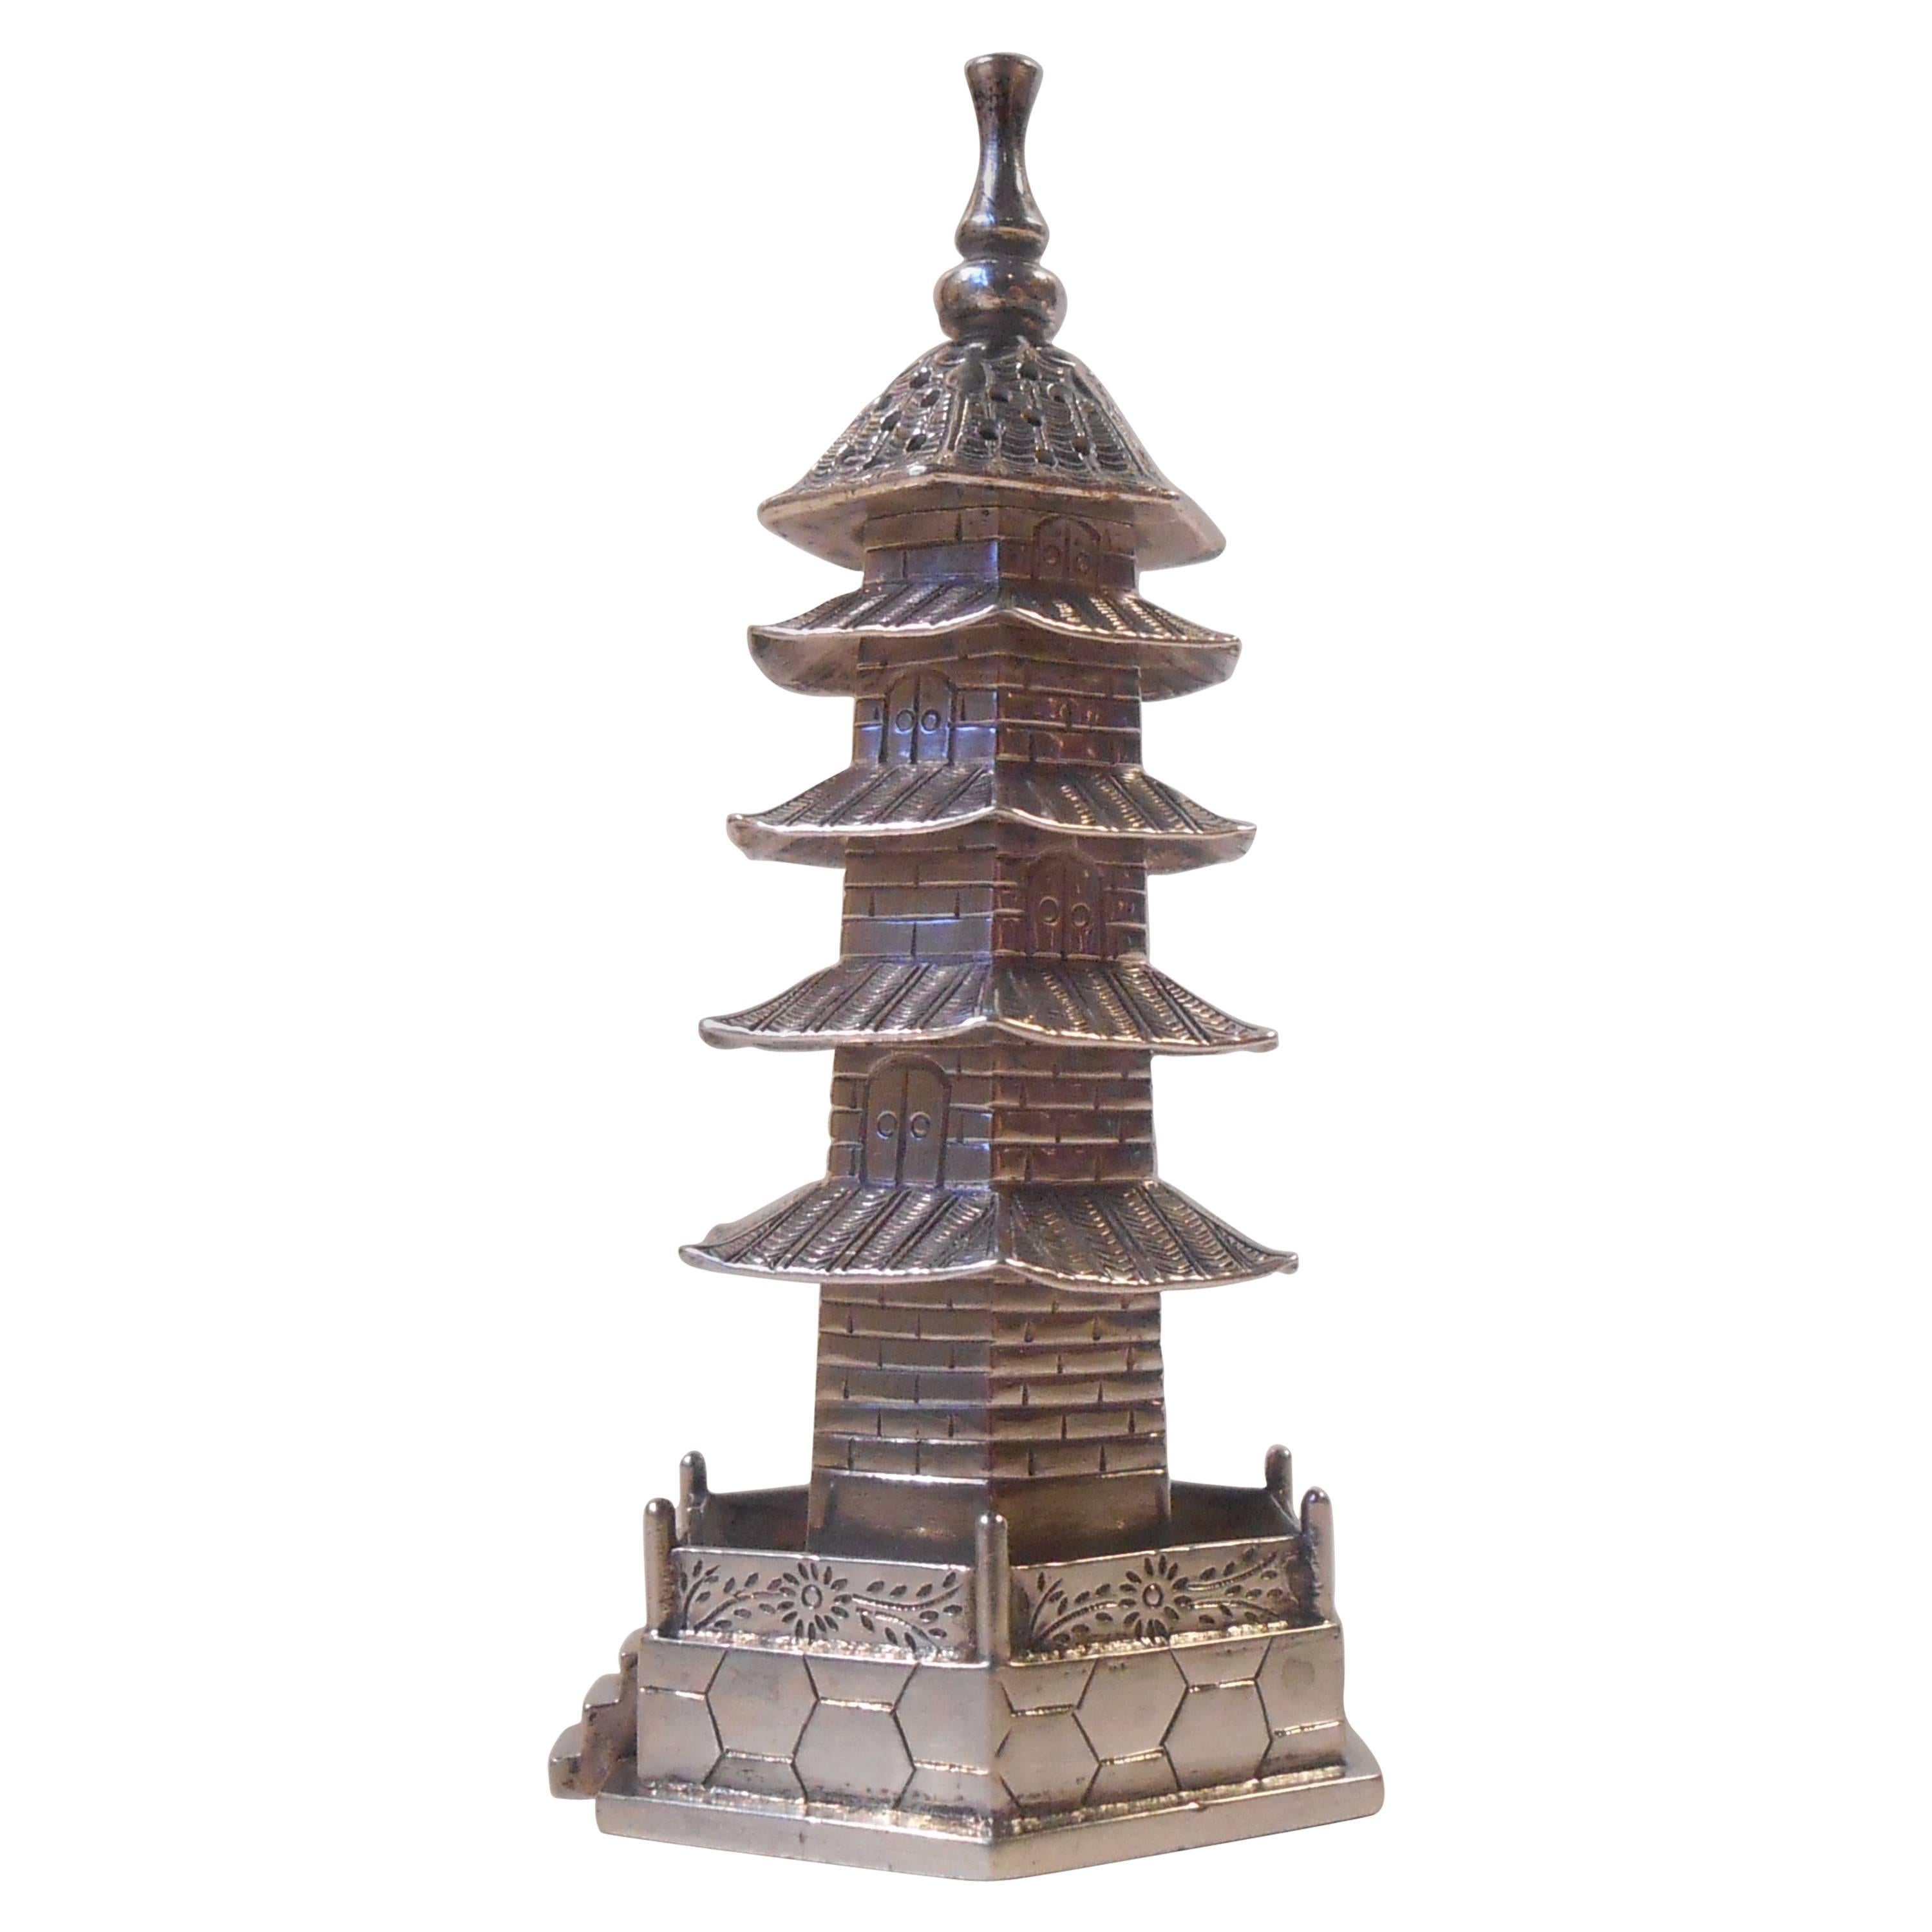 19th Century Chinese Export Silver Pagoda Pepperette by Zee Wo, Shanghai, 1890s